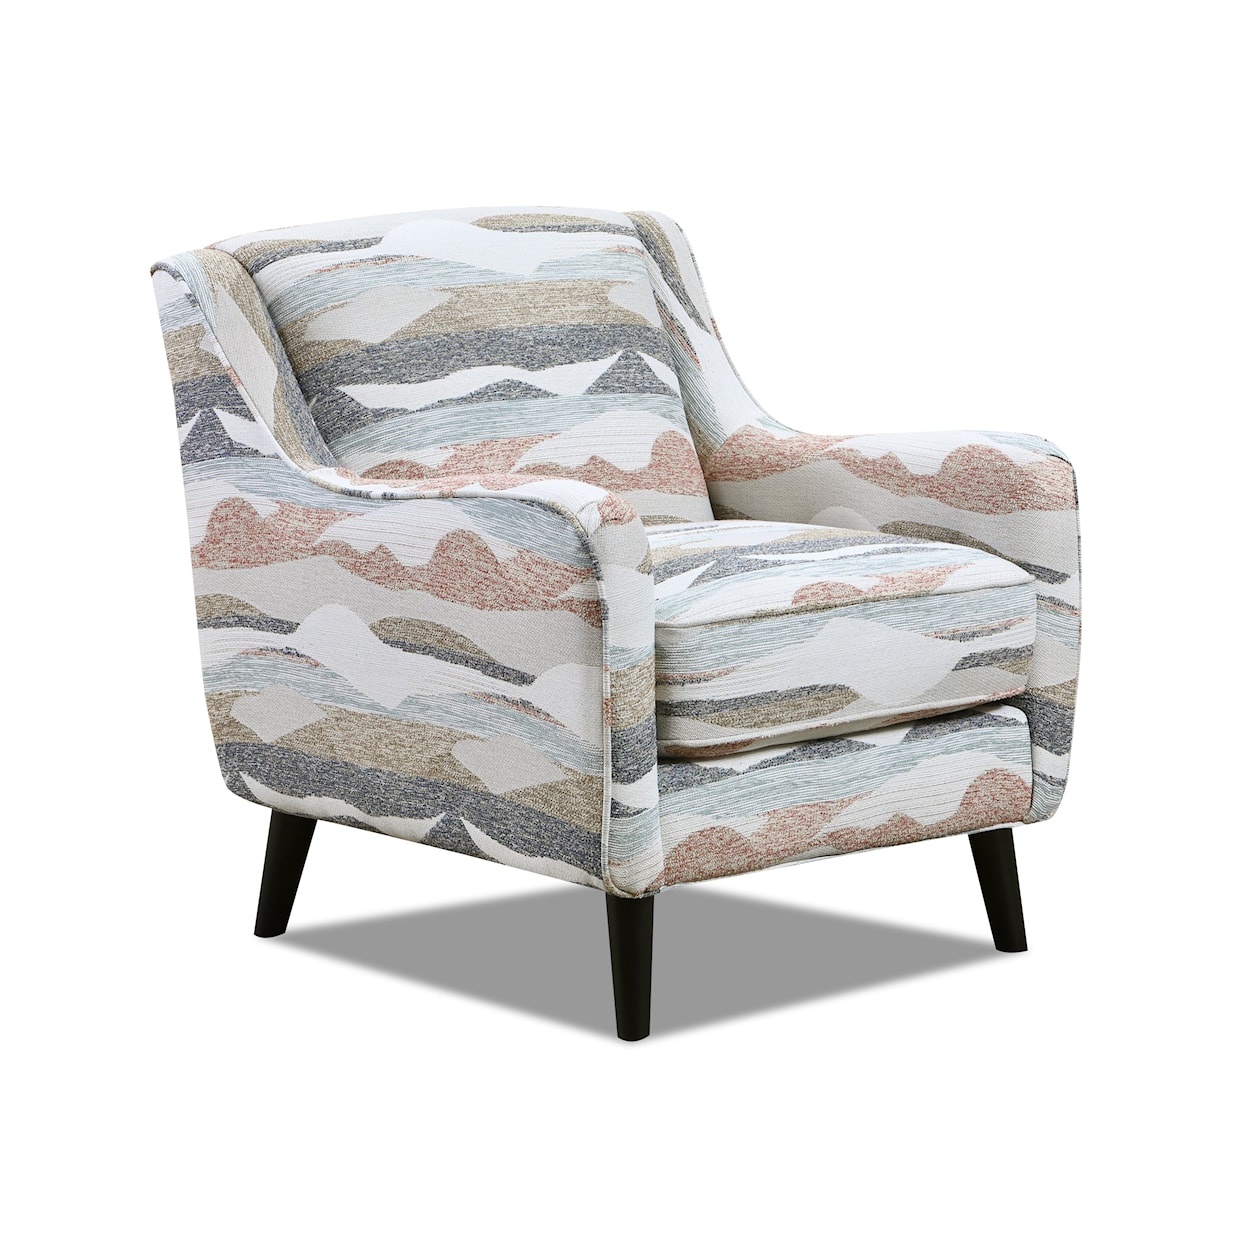 Fusion Furniture 7000 MISSIONARY SALT Accent Chair